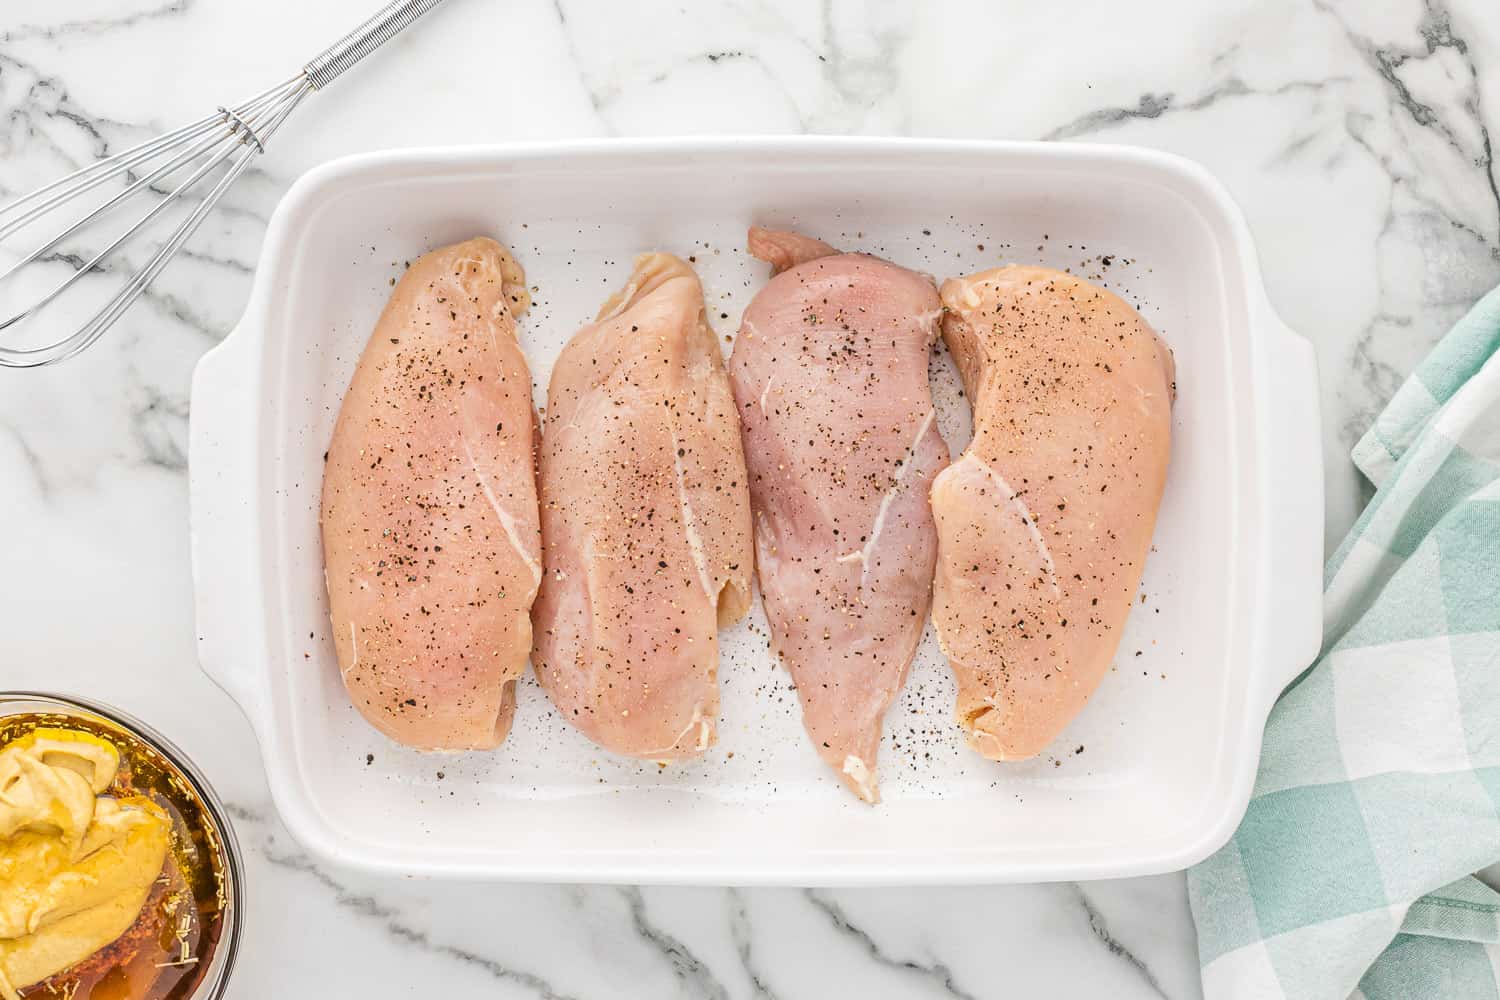 Raw chicken seasoned with salt and pepper.